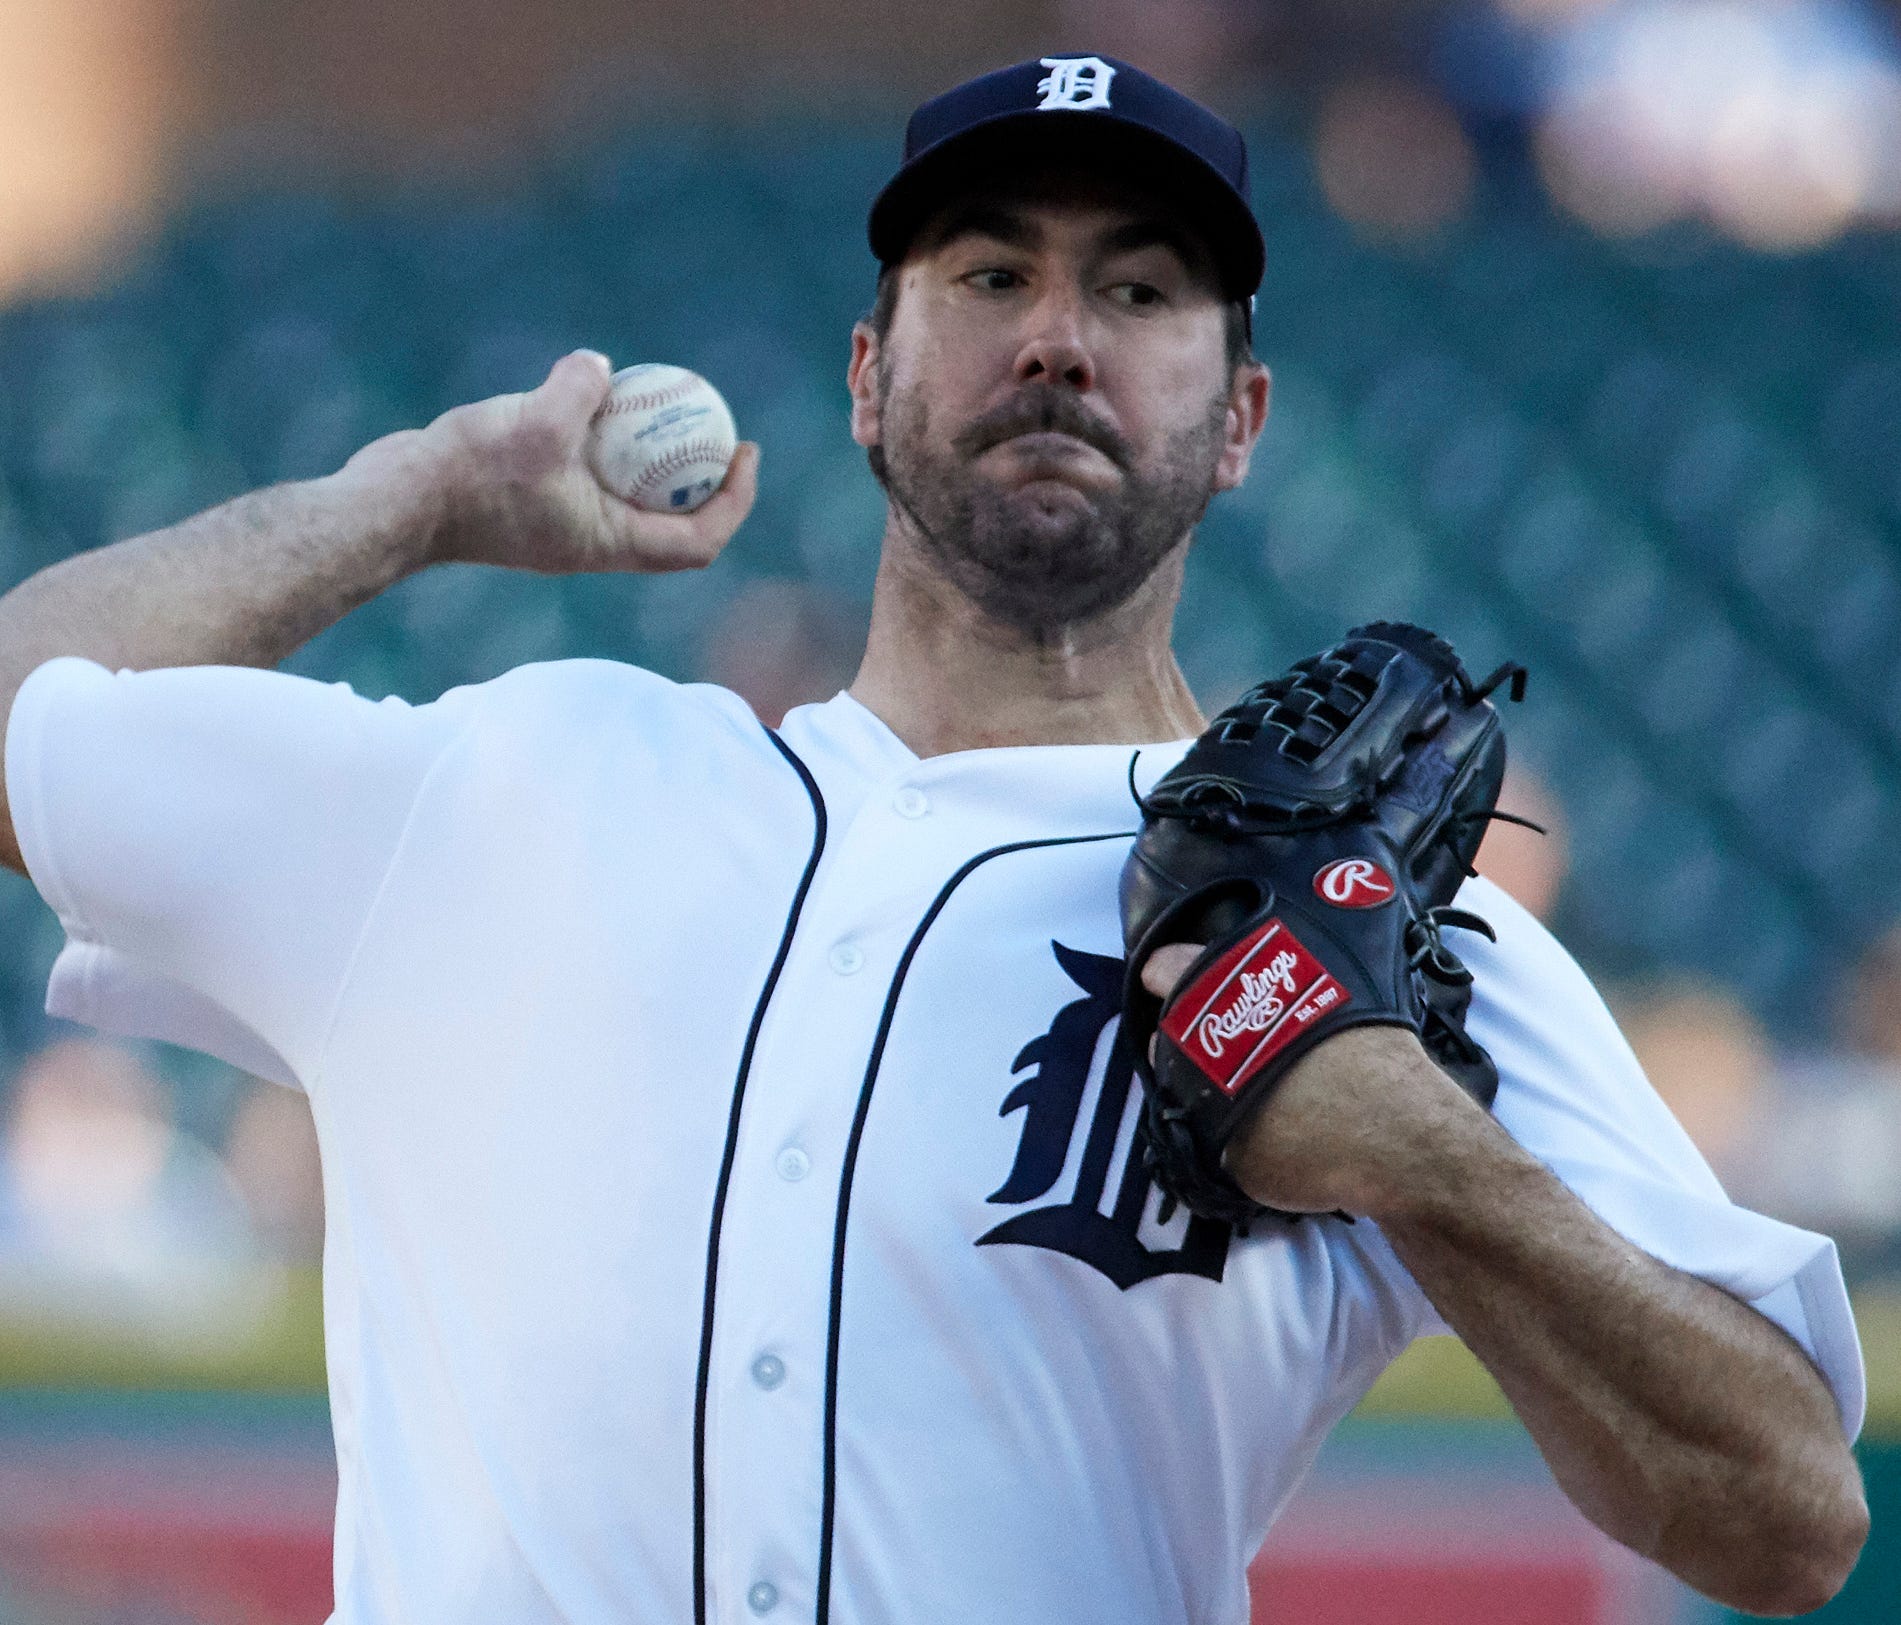 Jul 24, 2017; Detroit, MI, USA; Detroit Tigers pitcher Justin Verlander (35) pitches in the first inning against the Kansas City Royals at Comerica Park. Mandatory Credit: Rick Osentoski-USA TODAY Sports